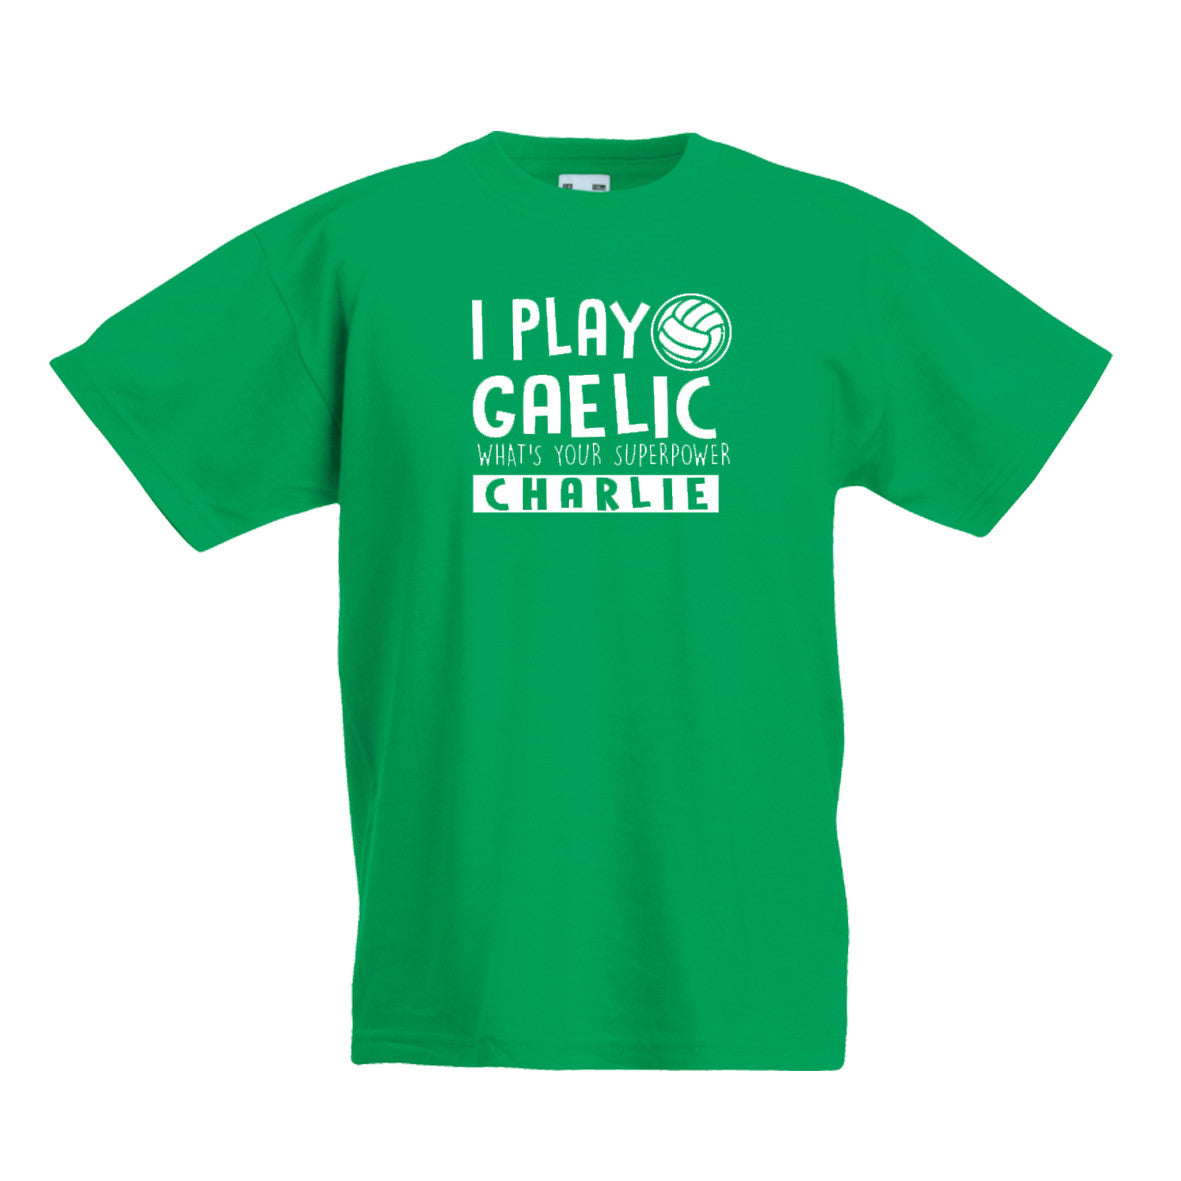 I Play Gaelic What's Your Superpower